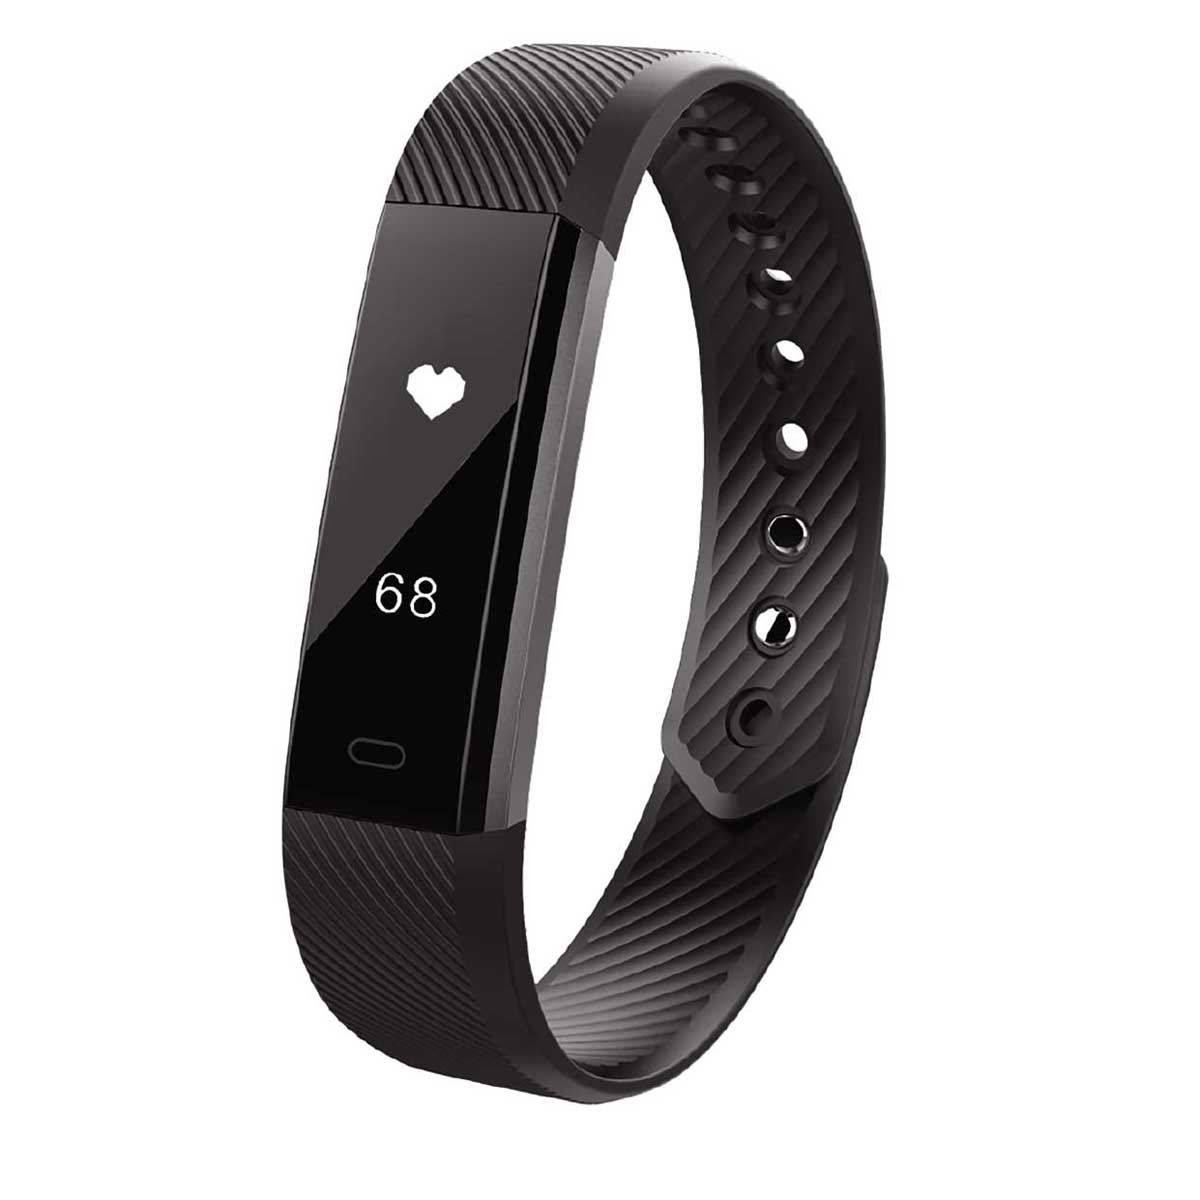 Paquete Desktop All-In-One 24-F031 Hp+ Fitness Tracker